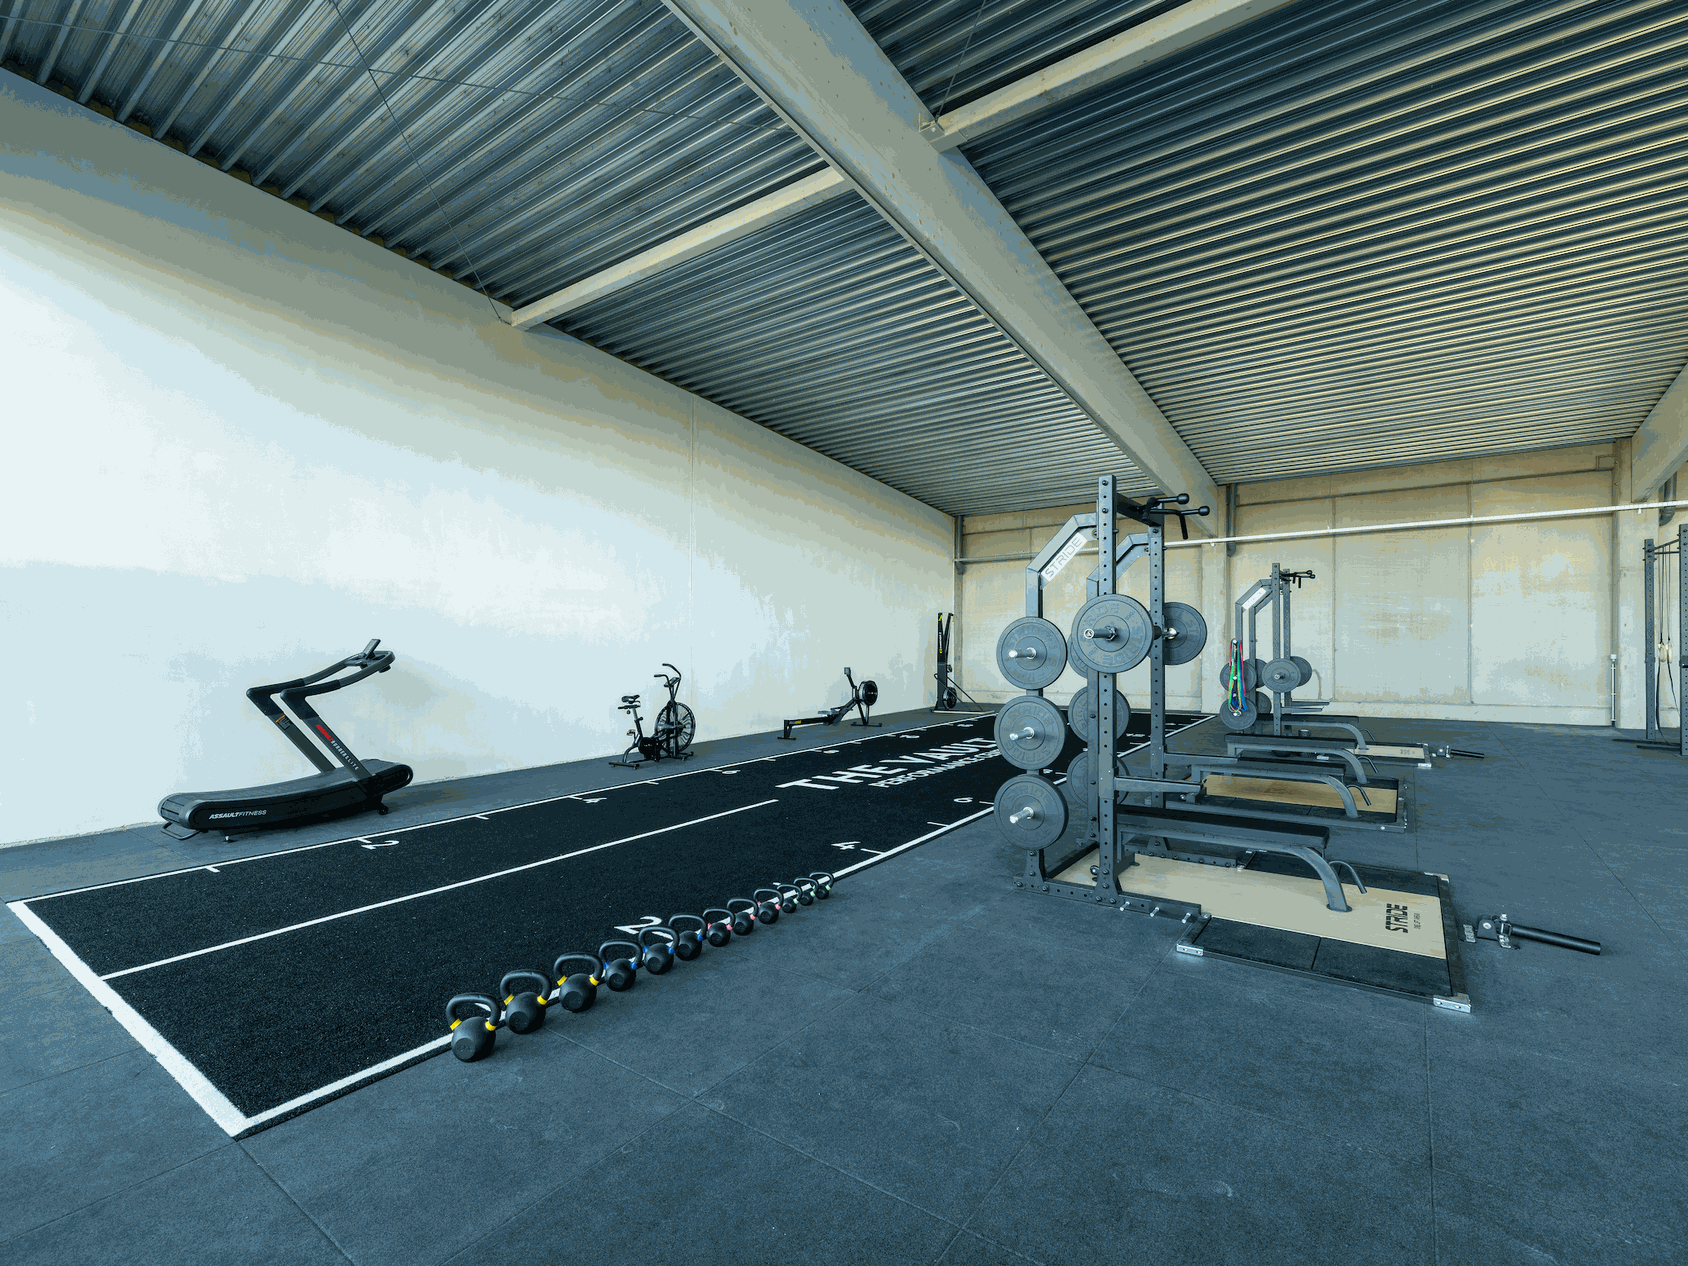 weight training and cardio workout machines in gym